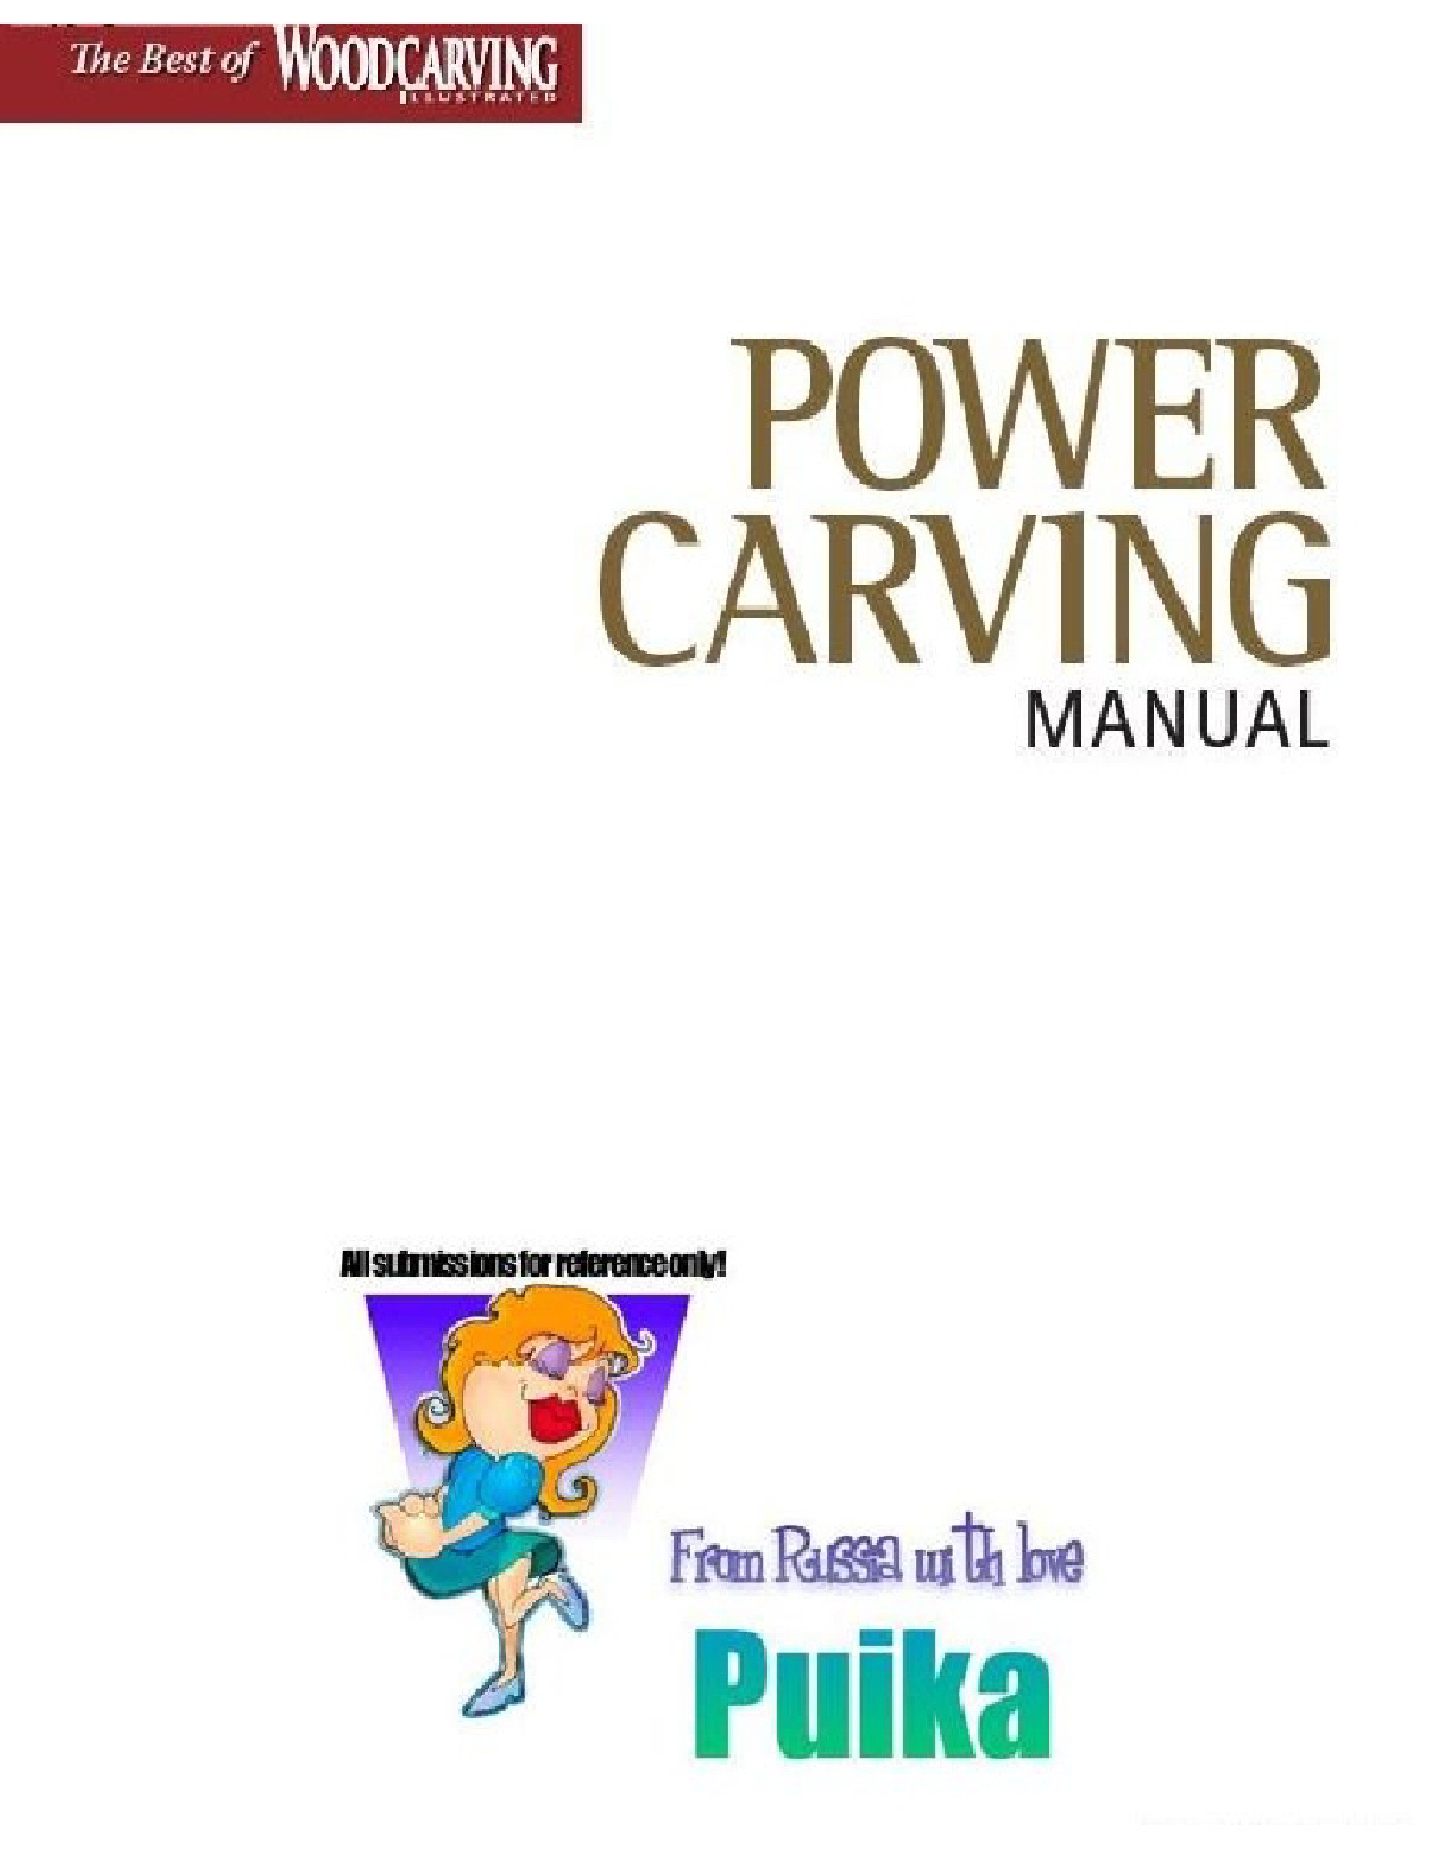 Power Carving Manual Tools, Techniques, and 12 All Time Favorite Projects 2009 電力雕刻手動工具